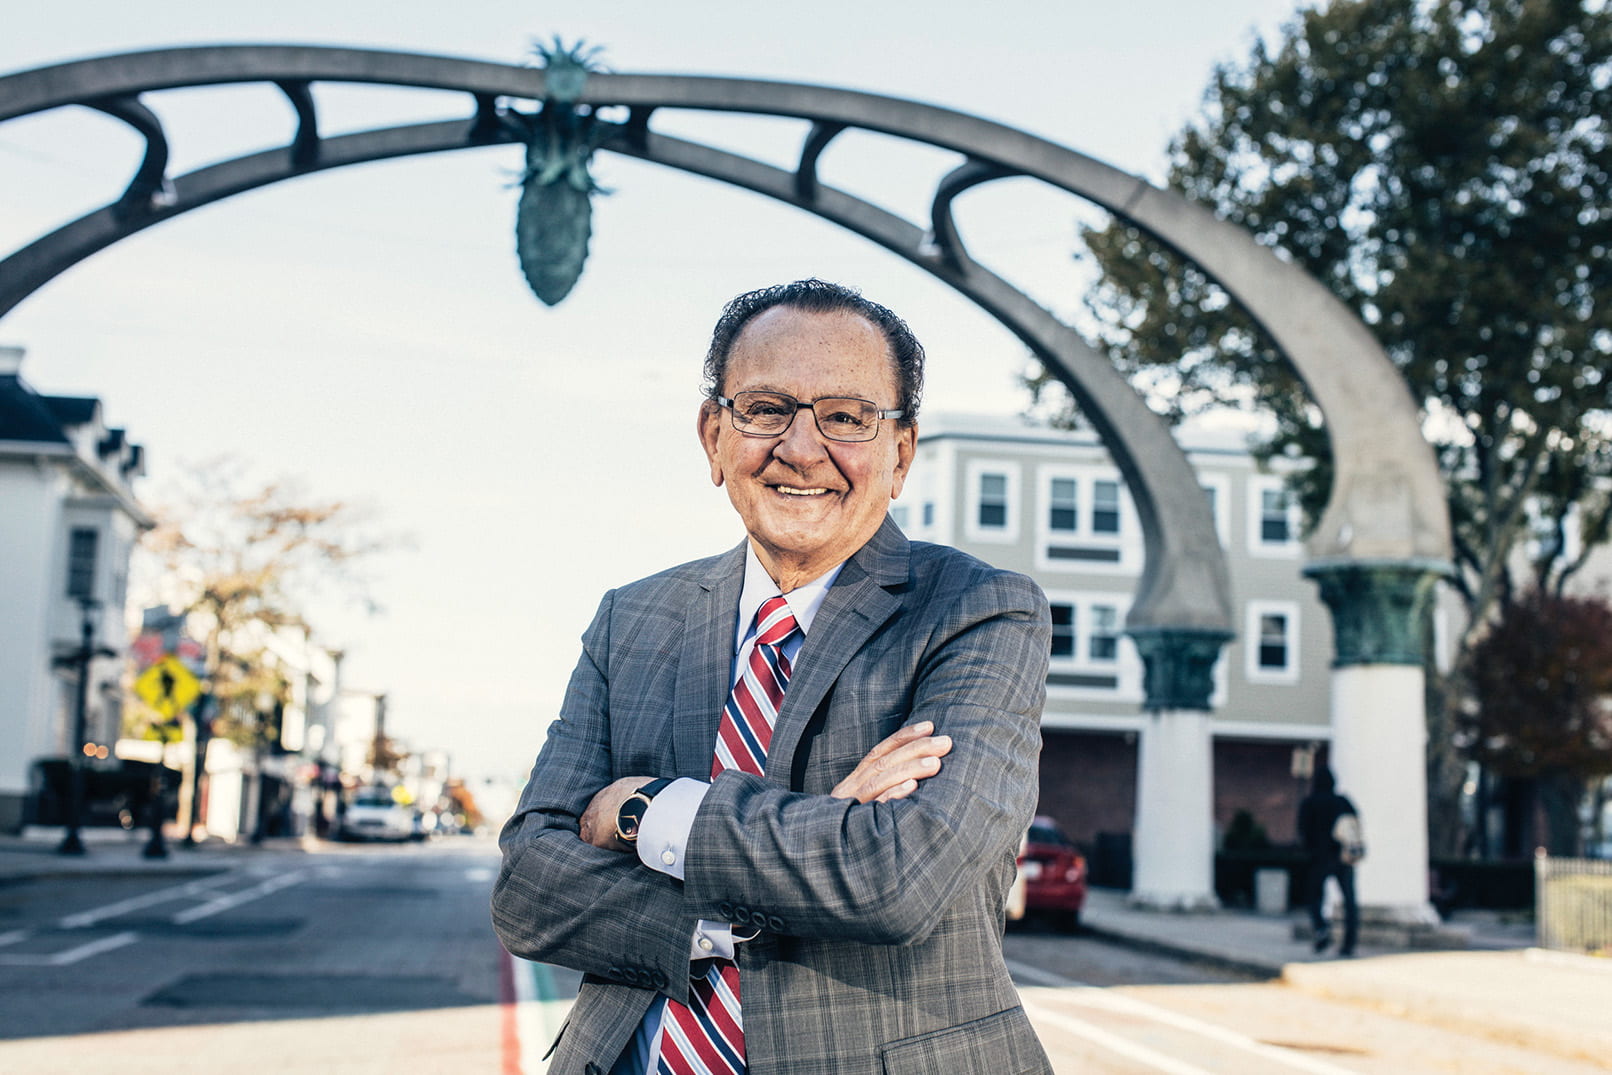 Providence Municipal Court Judge Frank Caprio '58 & '08Hon. moves millions of fans with compassionate jurisprudence and sharp wit on televison's Caught in Providence.